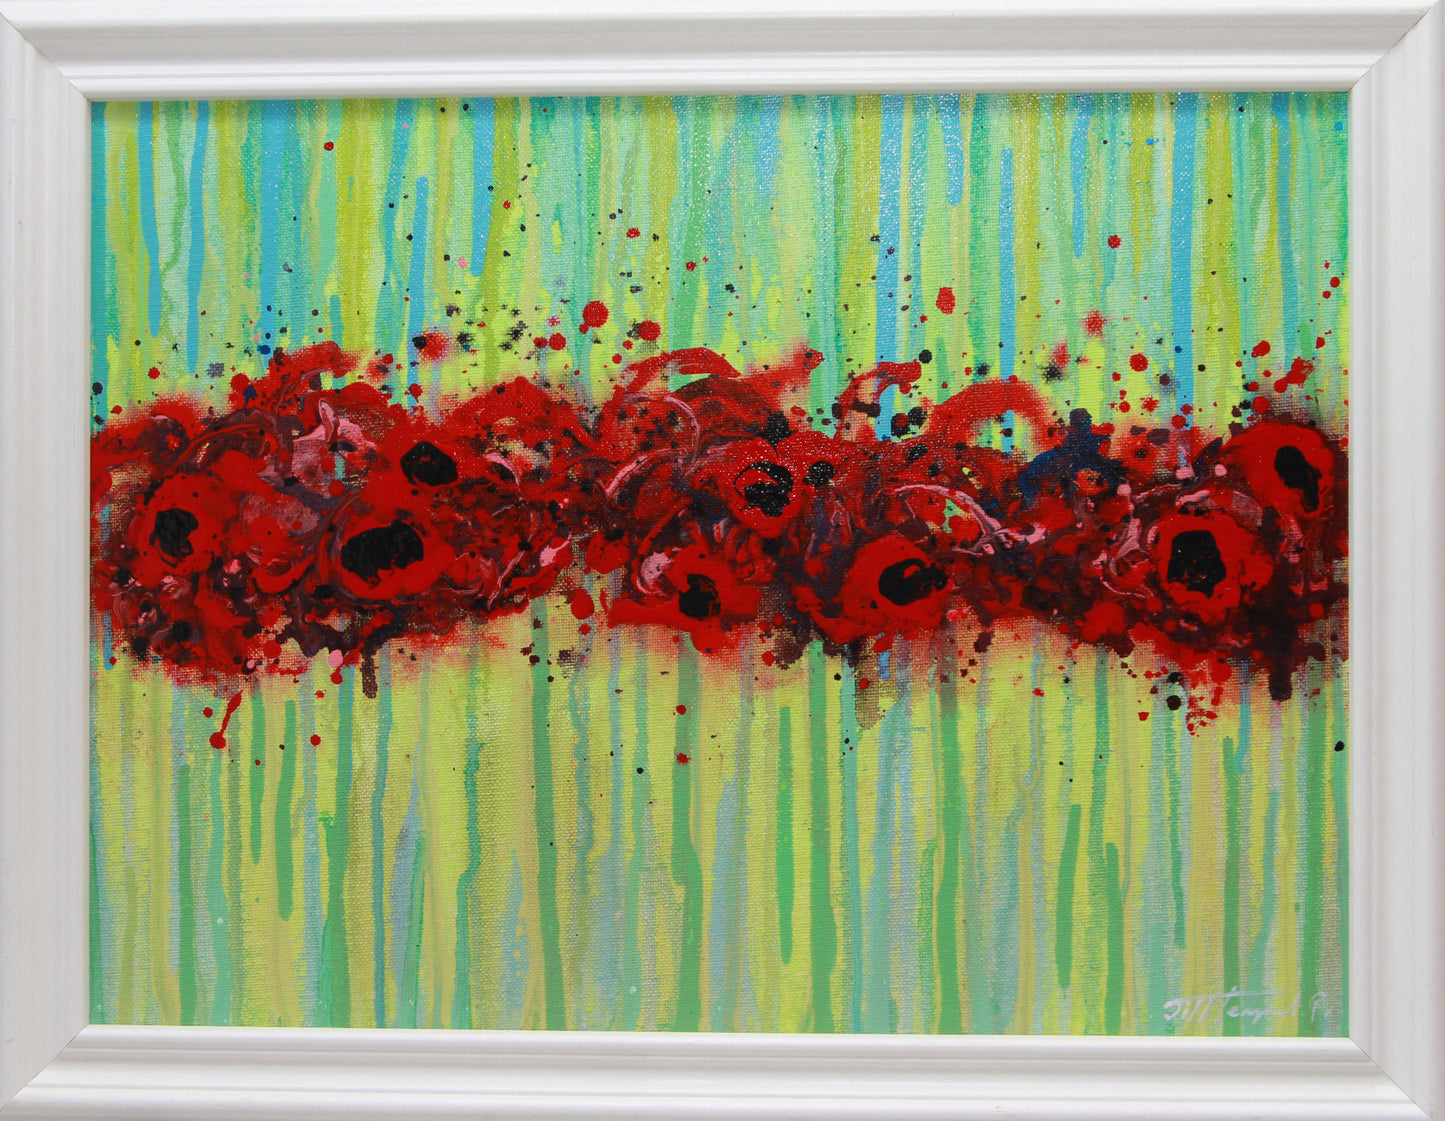 Glory - Abstract Poppies